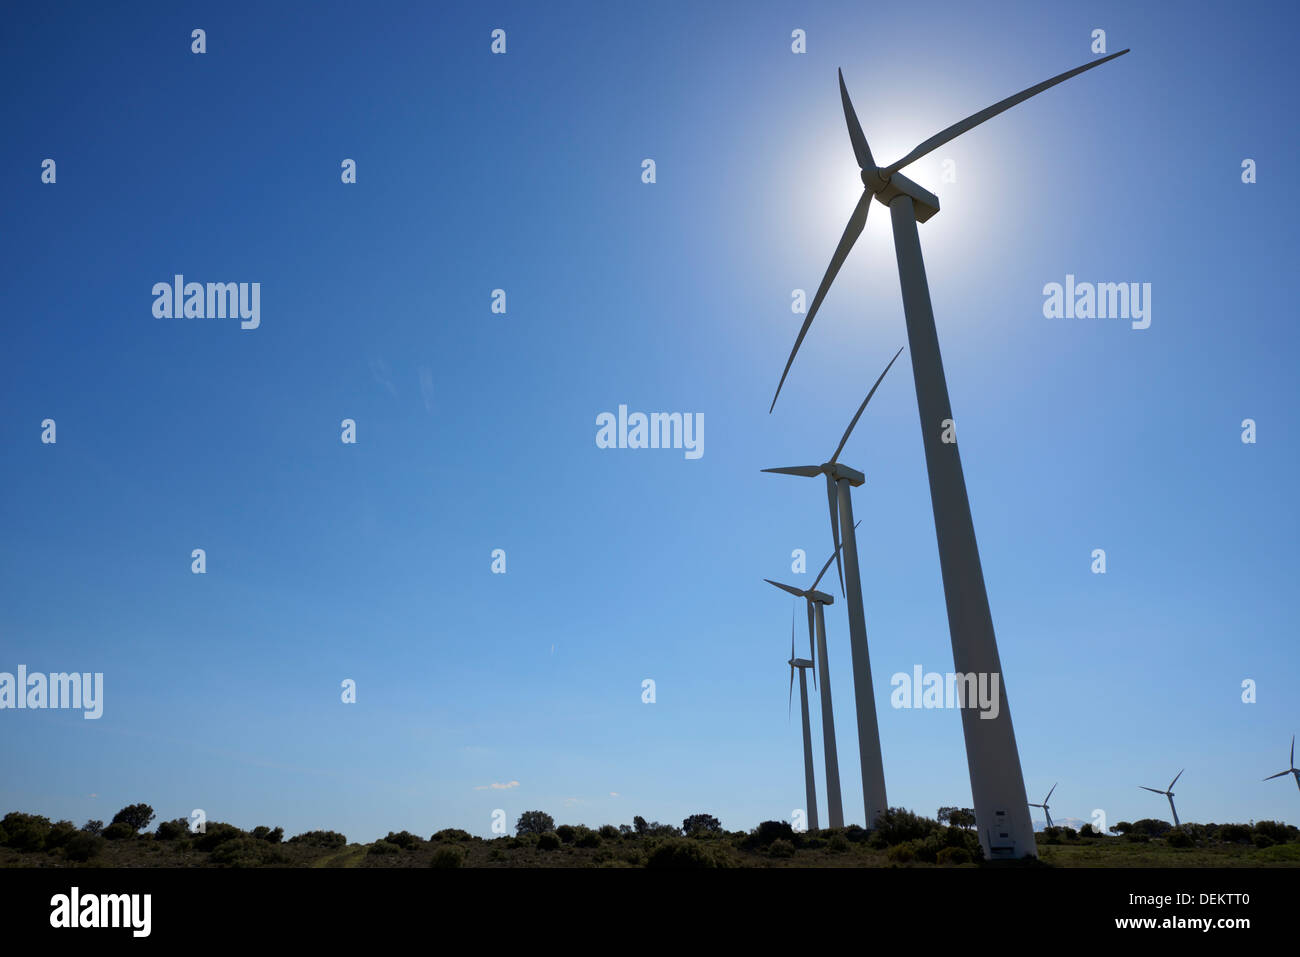 silhouette of a group of windmills for renewable electric energy production, El Buste, Zaragoza, Aragon, Spain Stock Photo